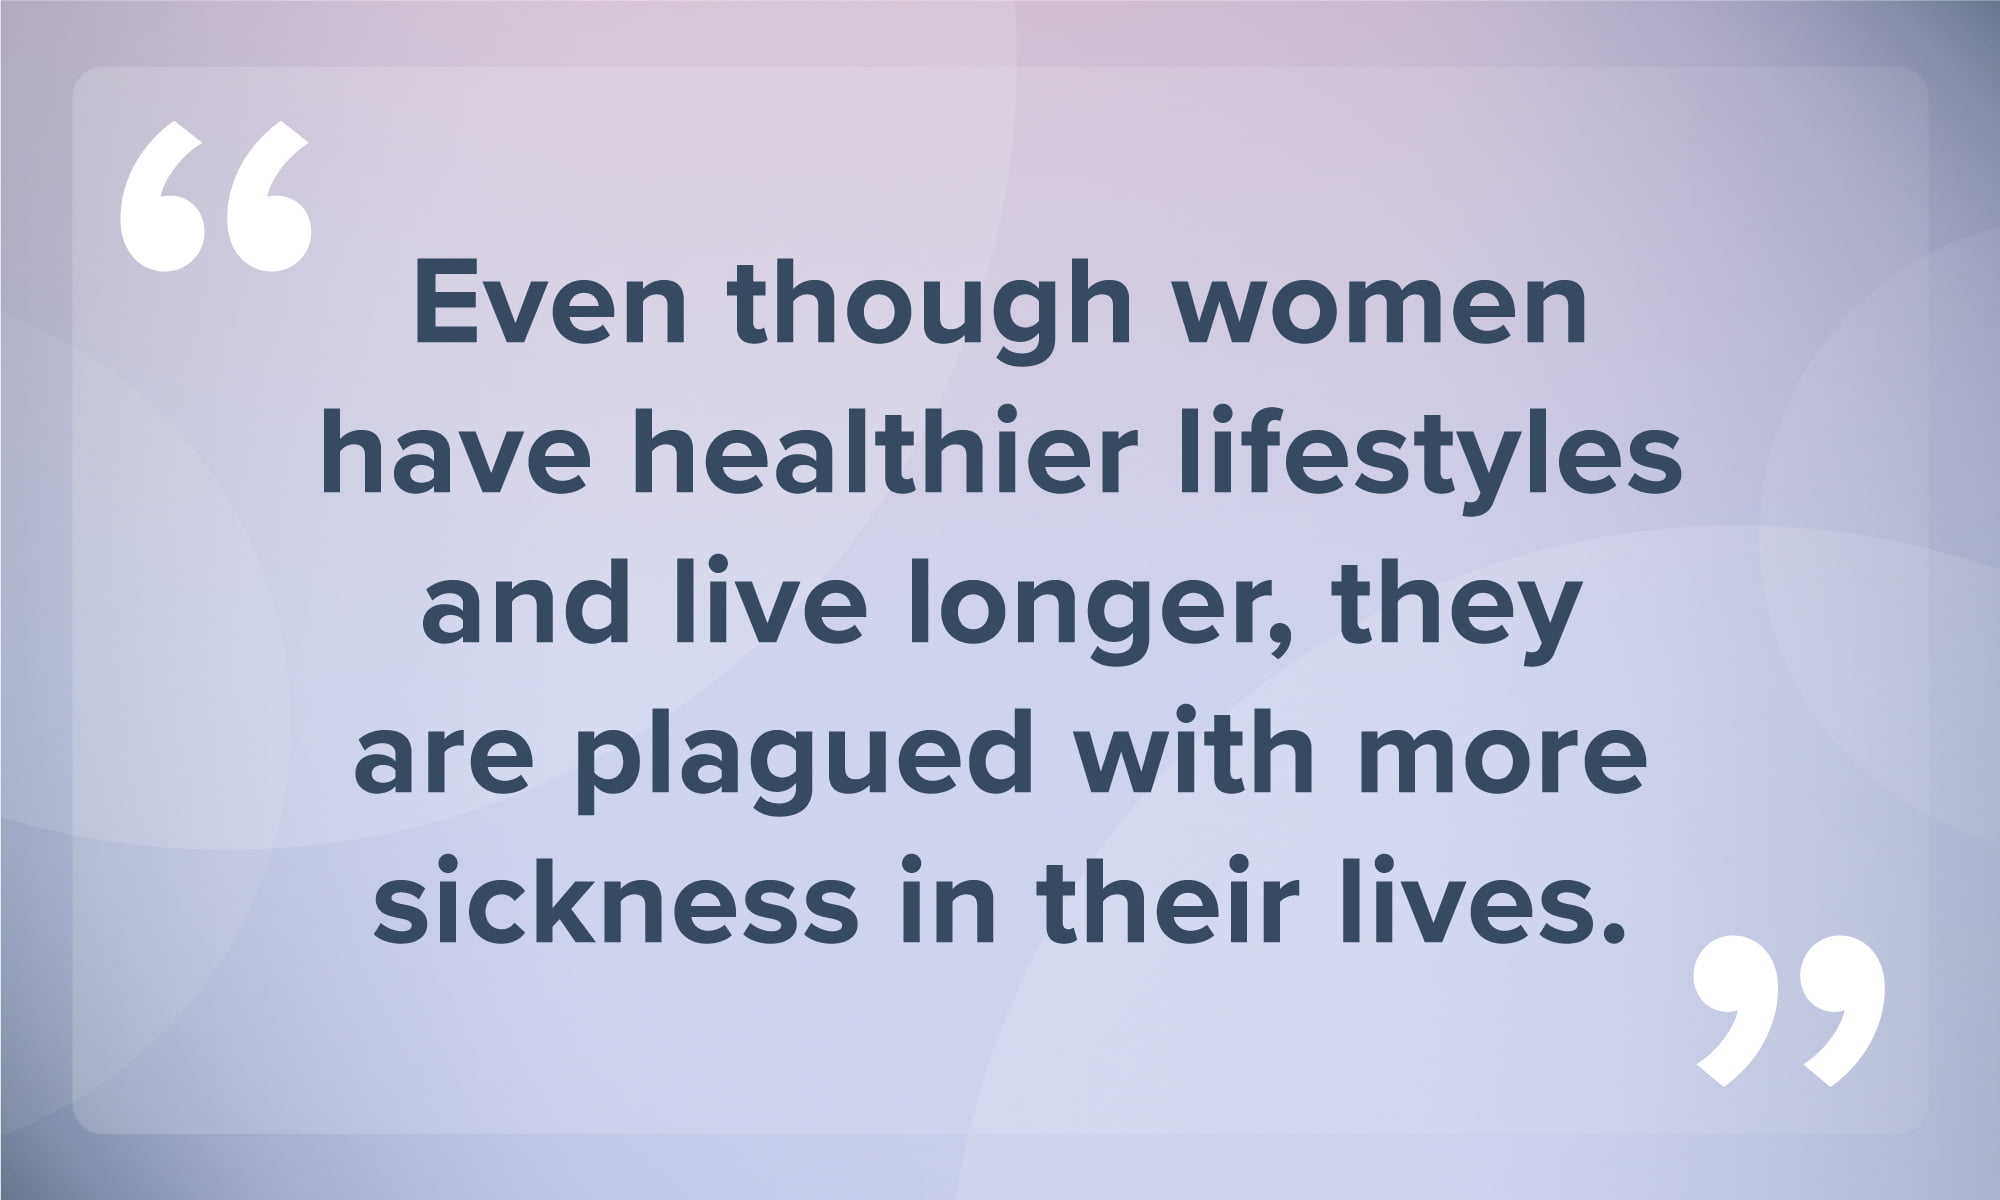 An image featuring a quote: "Even though women have healthier lifestyles and live longer, they are plagued with more sickness in their lives."